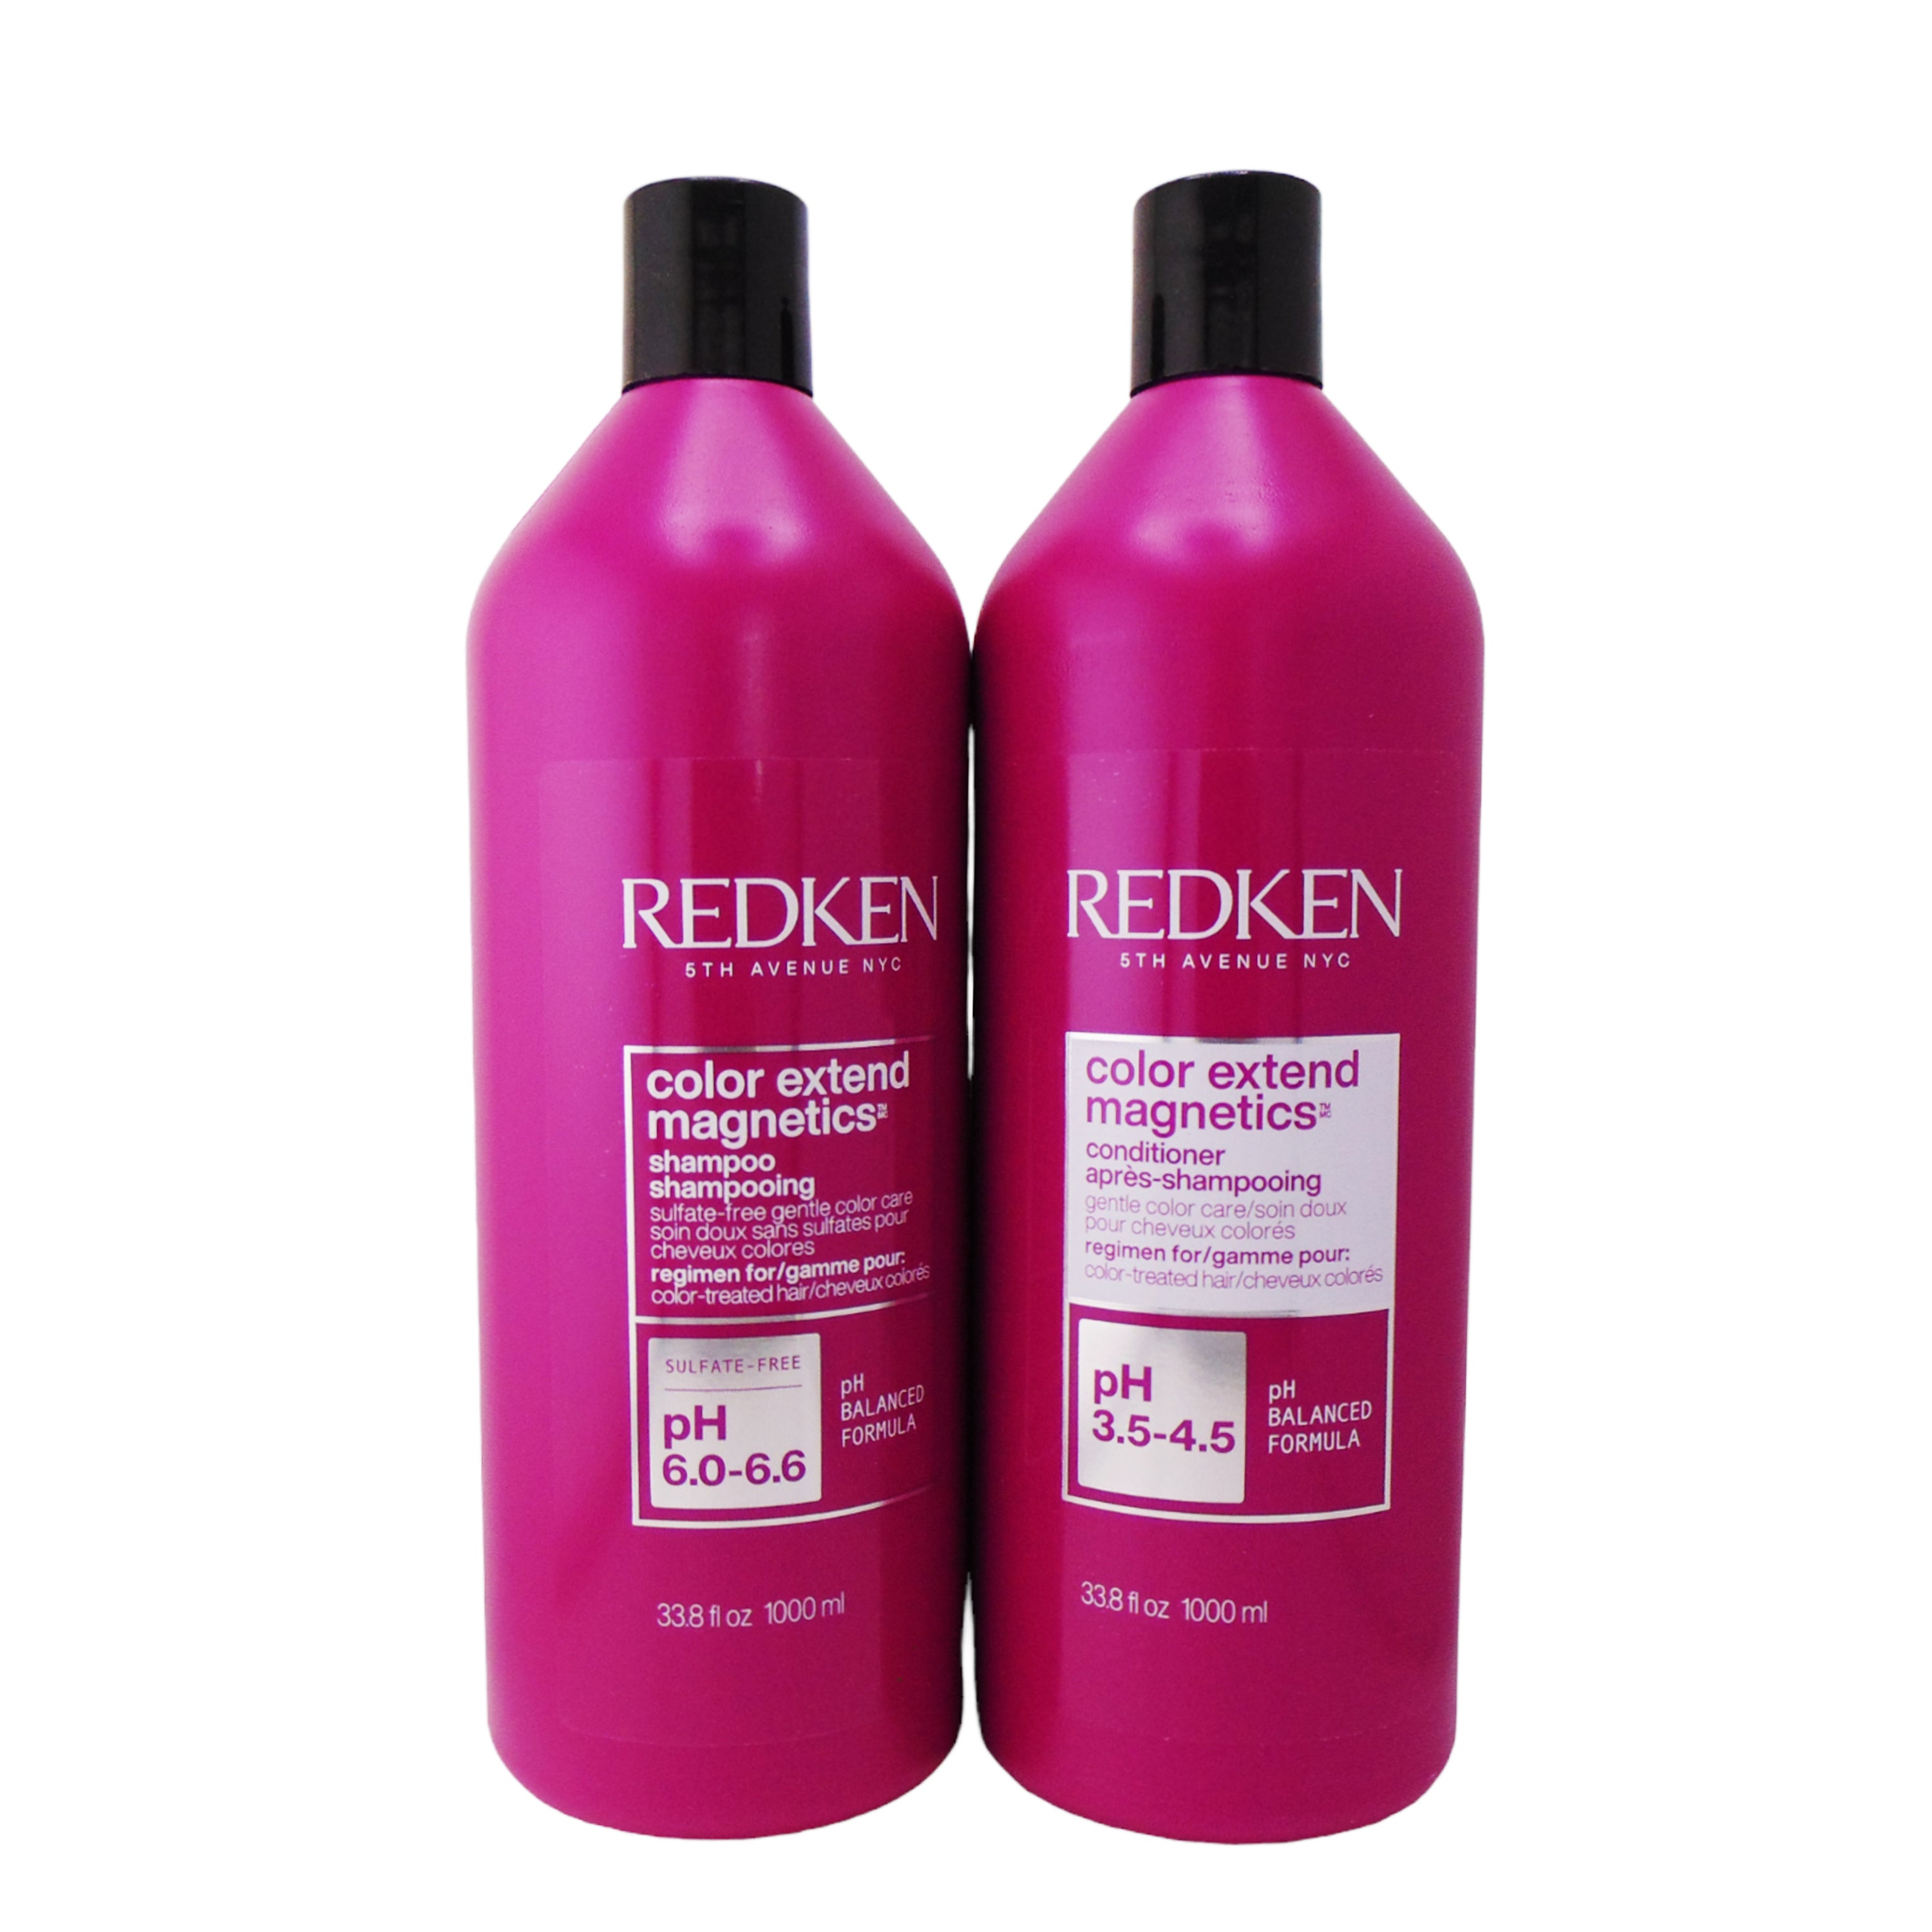 Redken Color Extend Magnetics Duo (Shampoo and Conditioner)